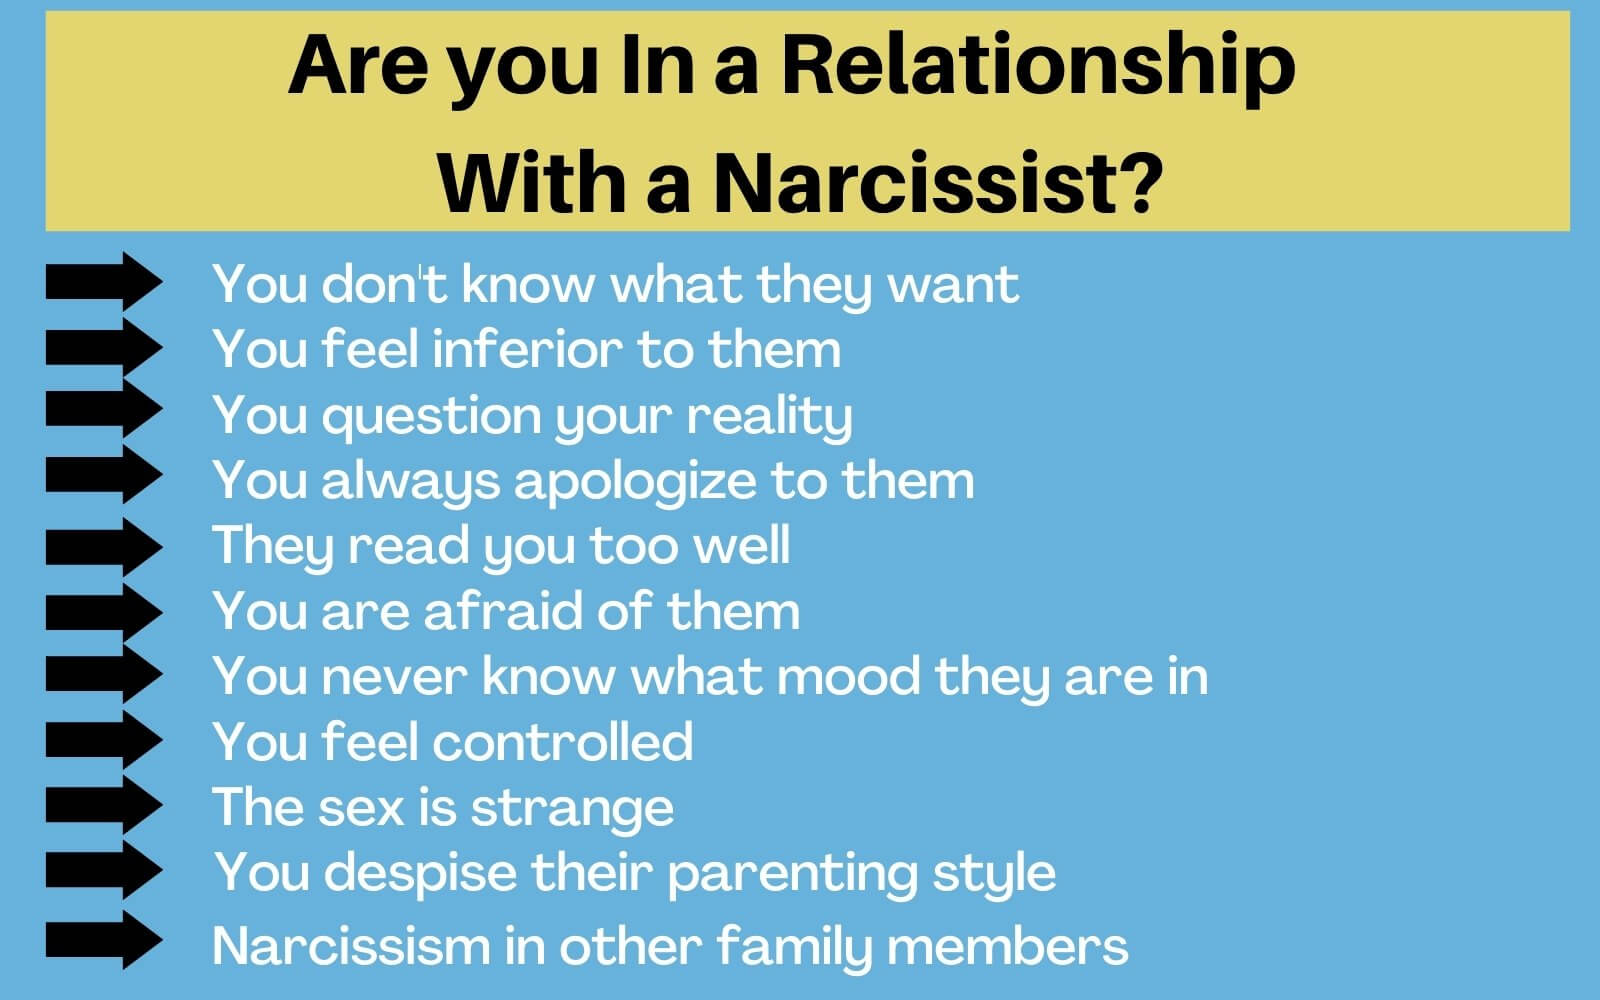 Can You Have a Good Relationship With a Narcissist 11857